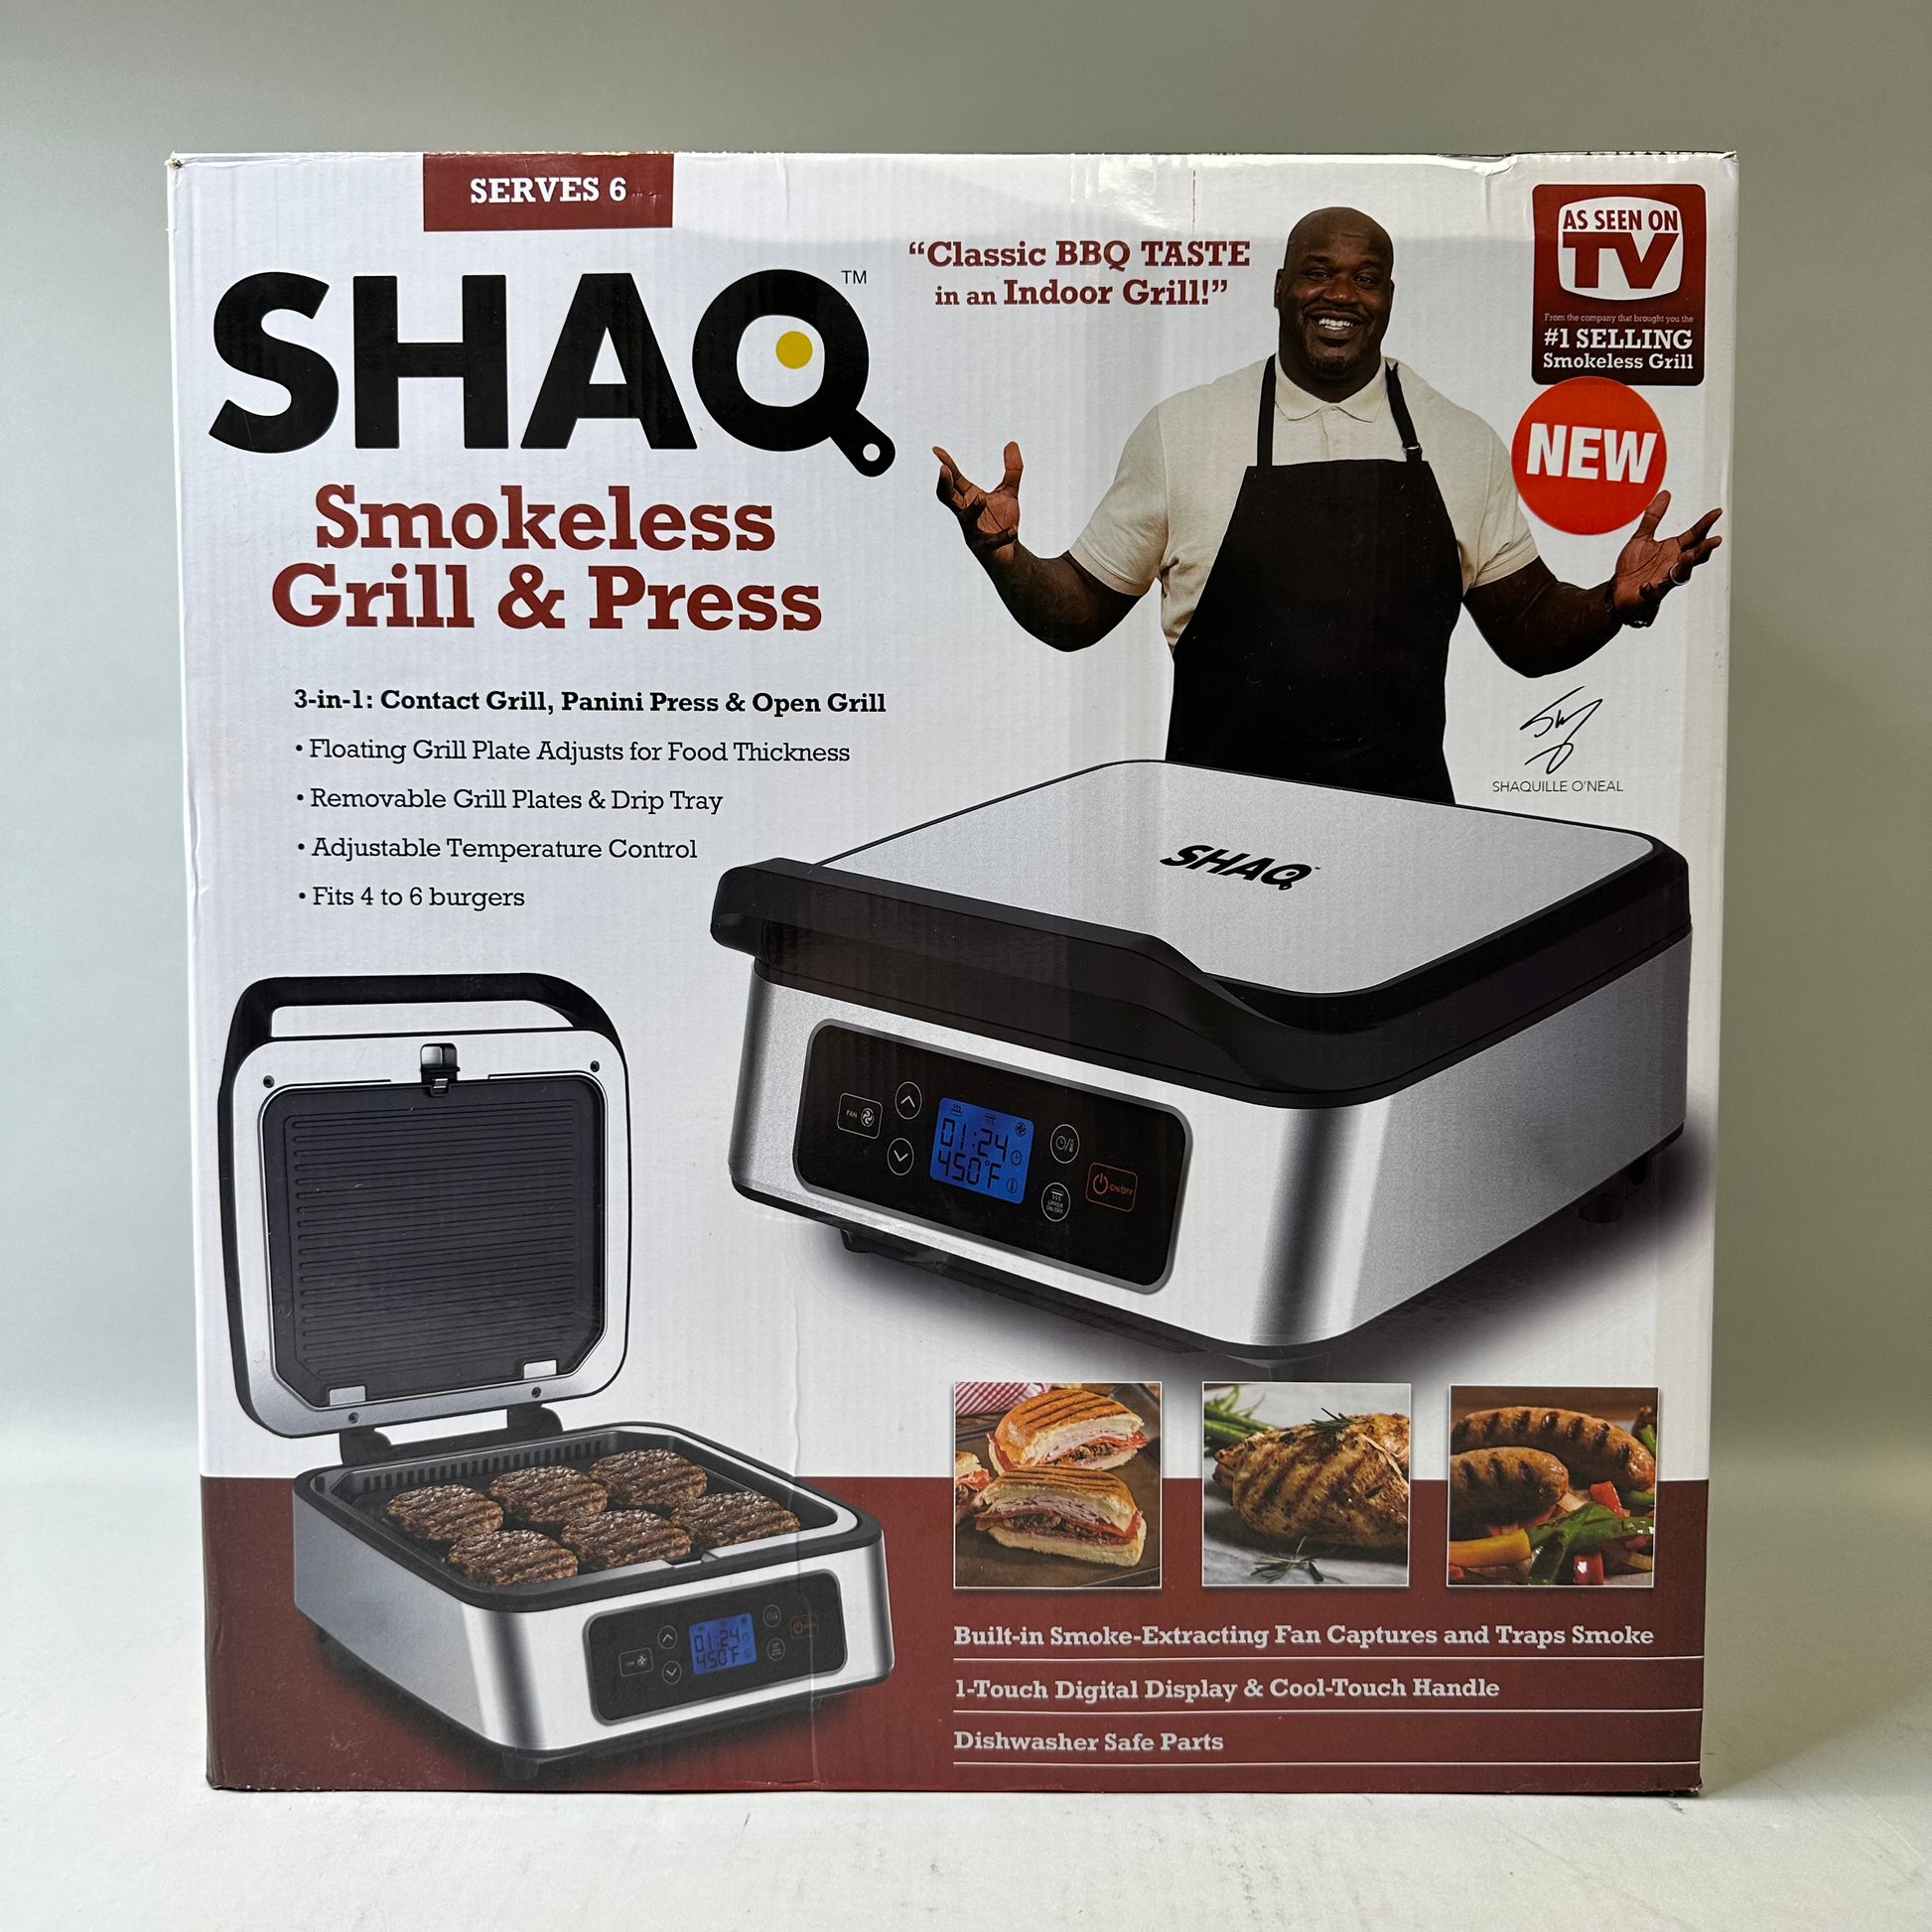 SHAQ 22 XL 1650W Smokeless 2-in-1 Indoor Electric Grill & Griddle